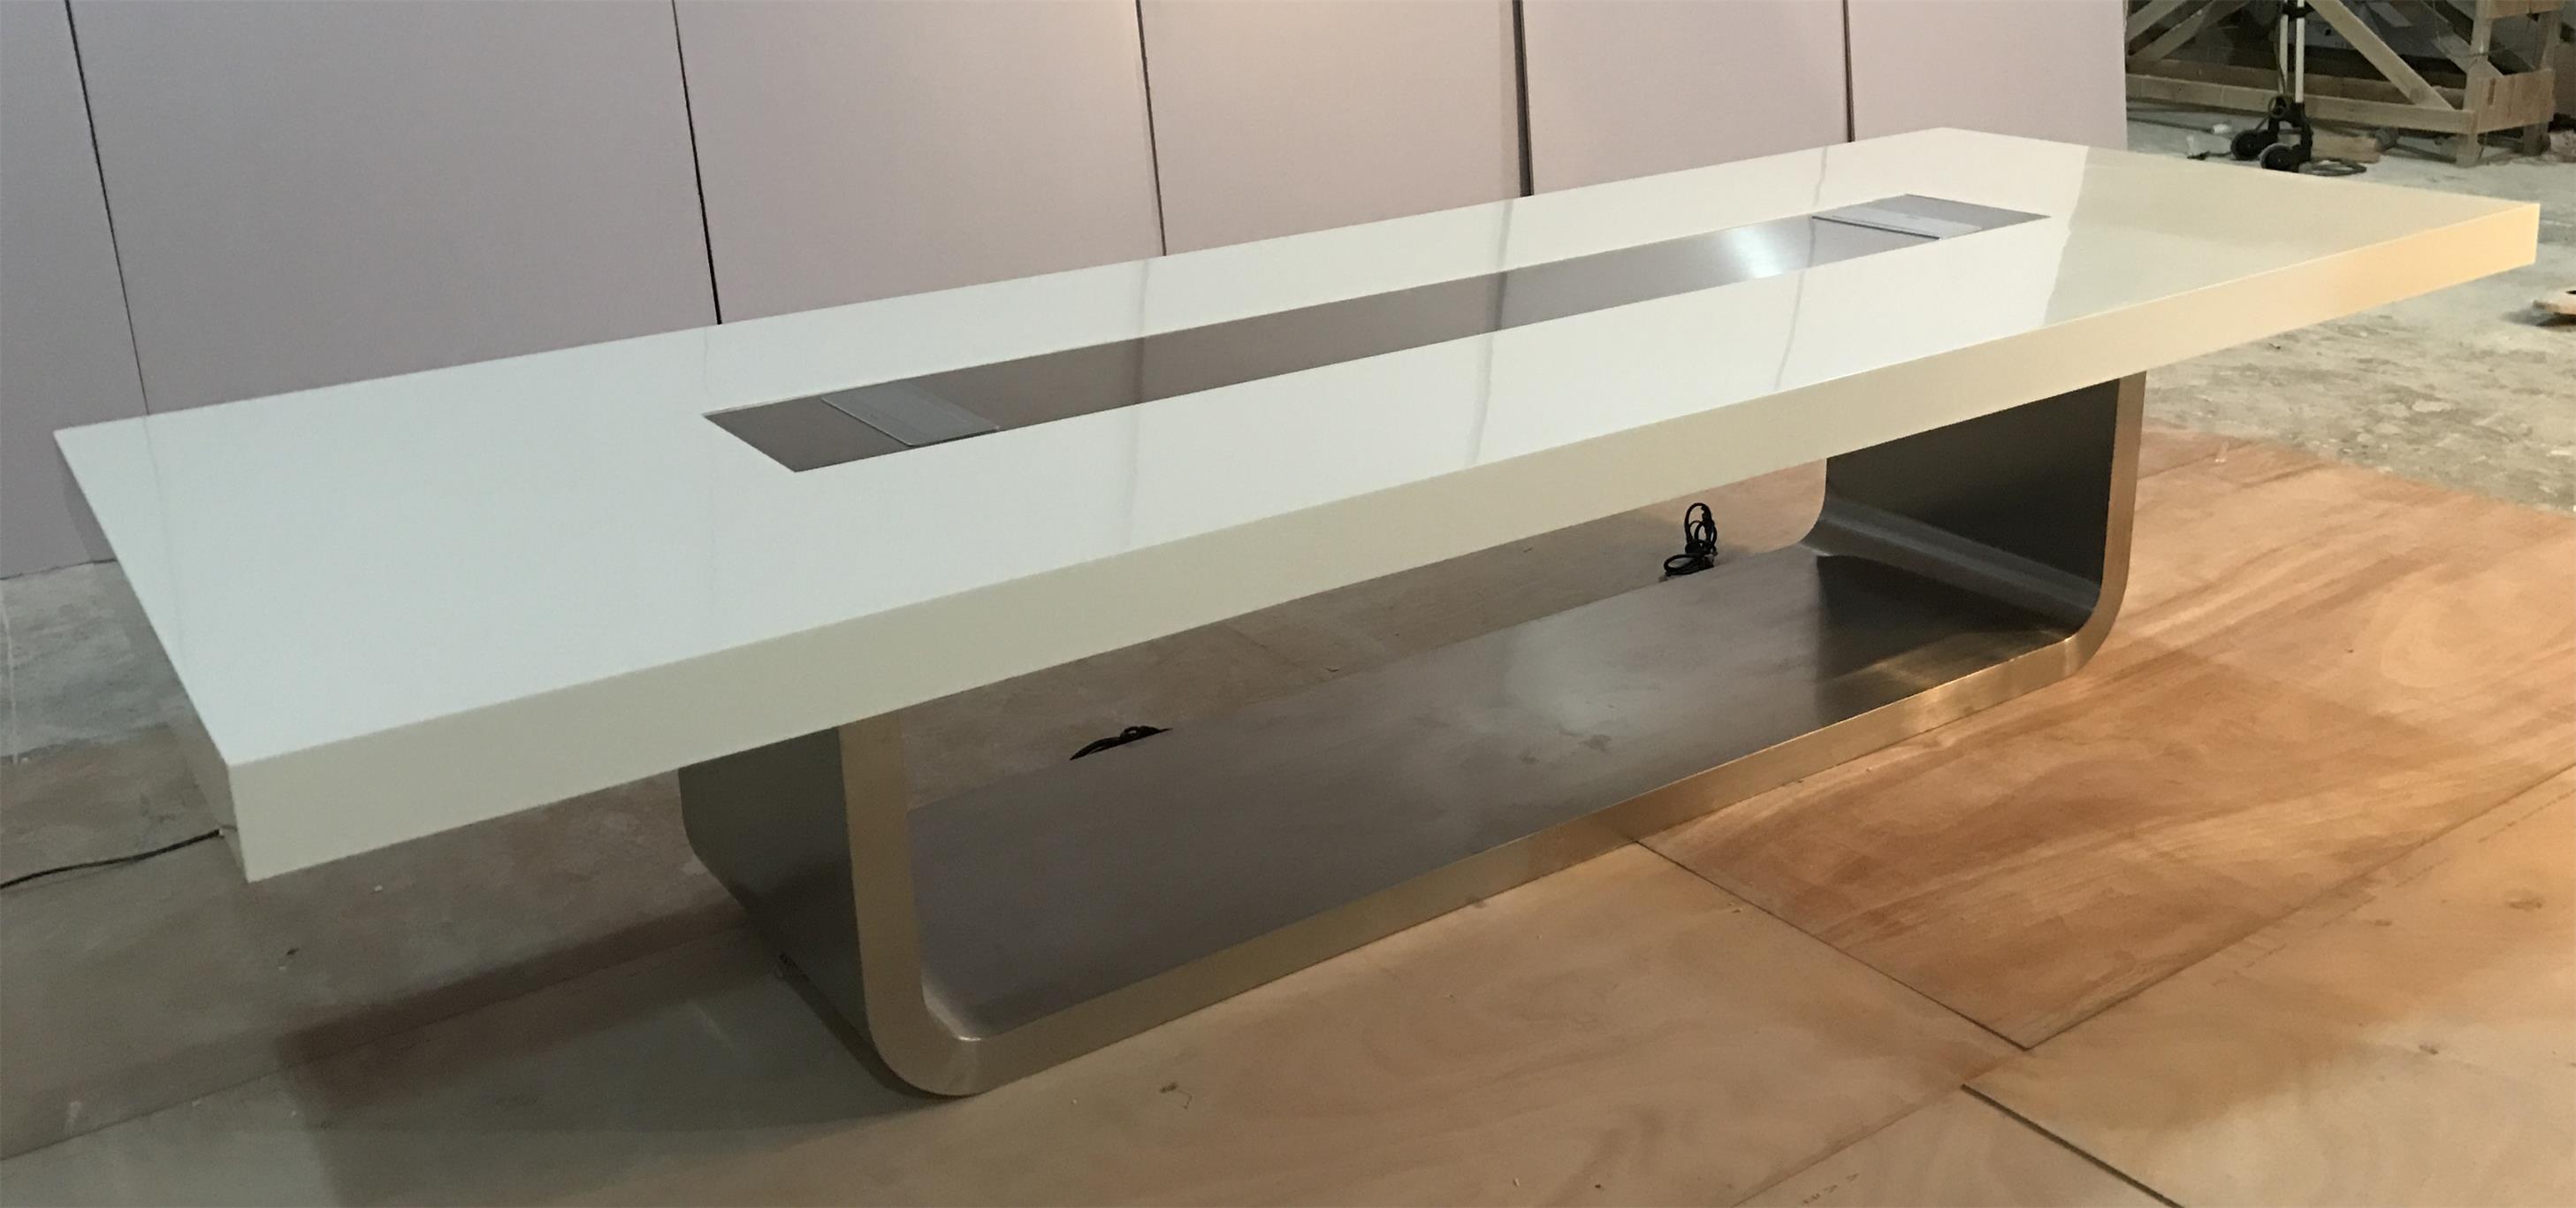 semless conference table.jpg